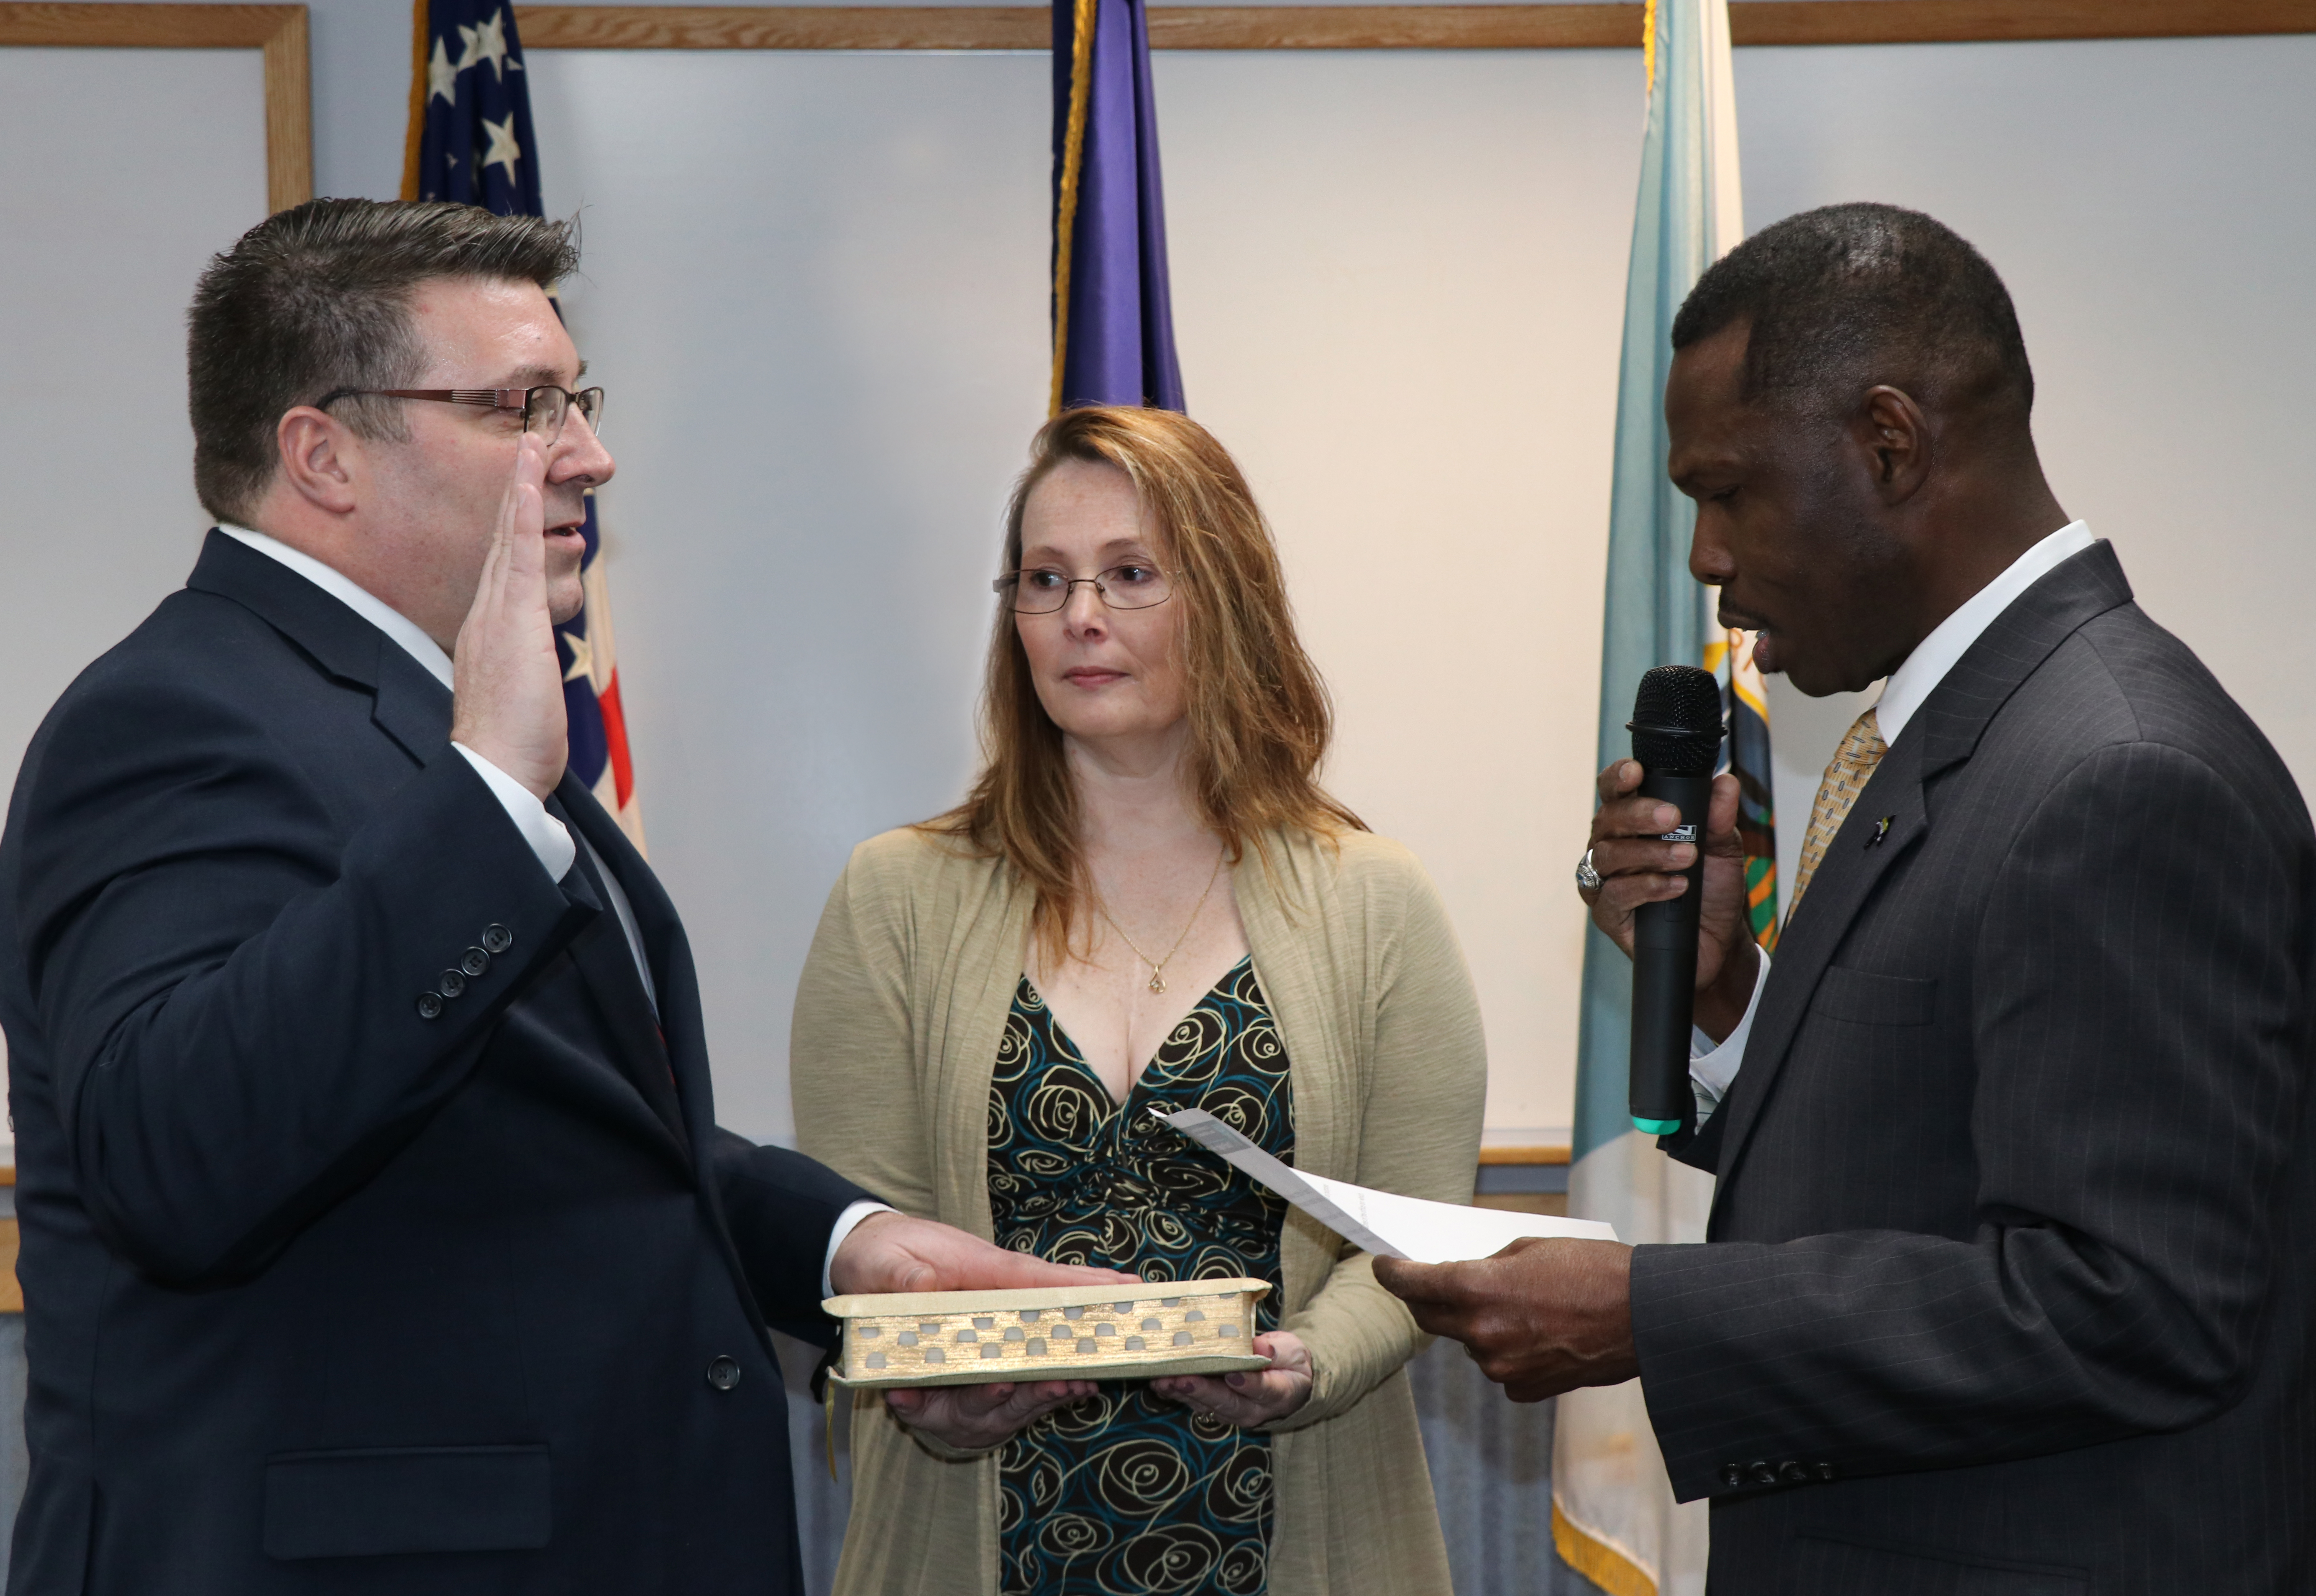 BLM Deputy Director of Operations Mike Nedd (right) administers the oath of office to new BLM Alaska State Director Chad Padgett (left) with the help Padgett’s wife Kambe to a crowd of about 200 family, friends, colleagues, and agency employees yesterday at the Federal Building in downtown Anchorage.